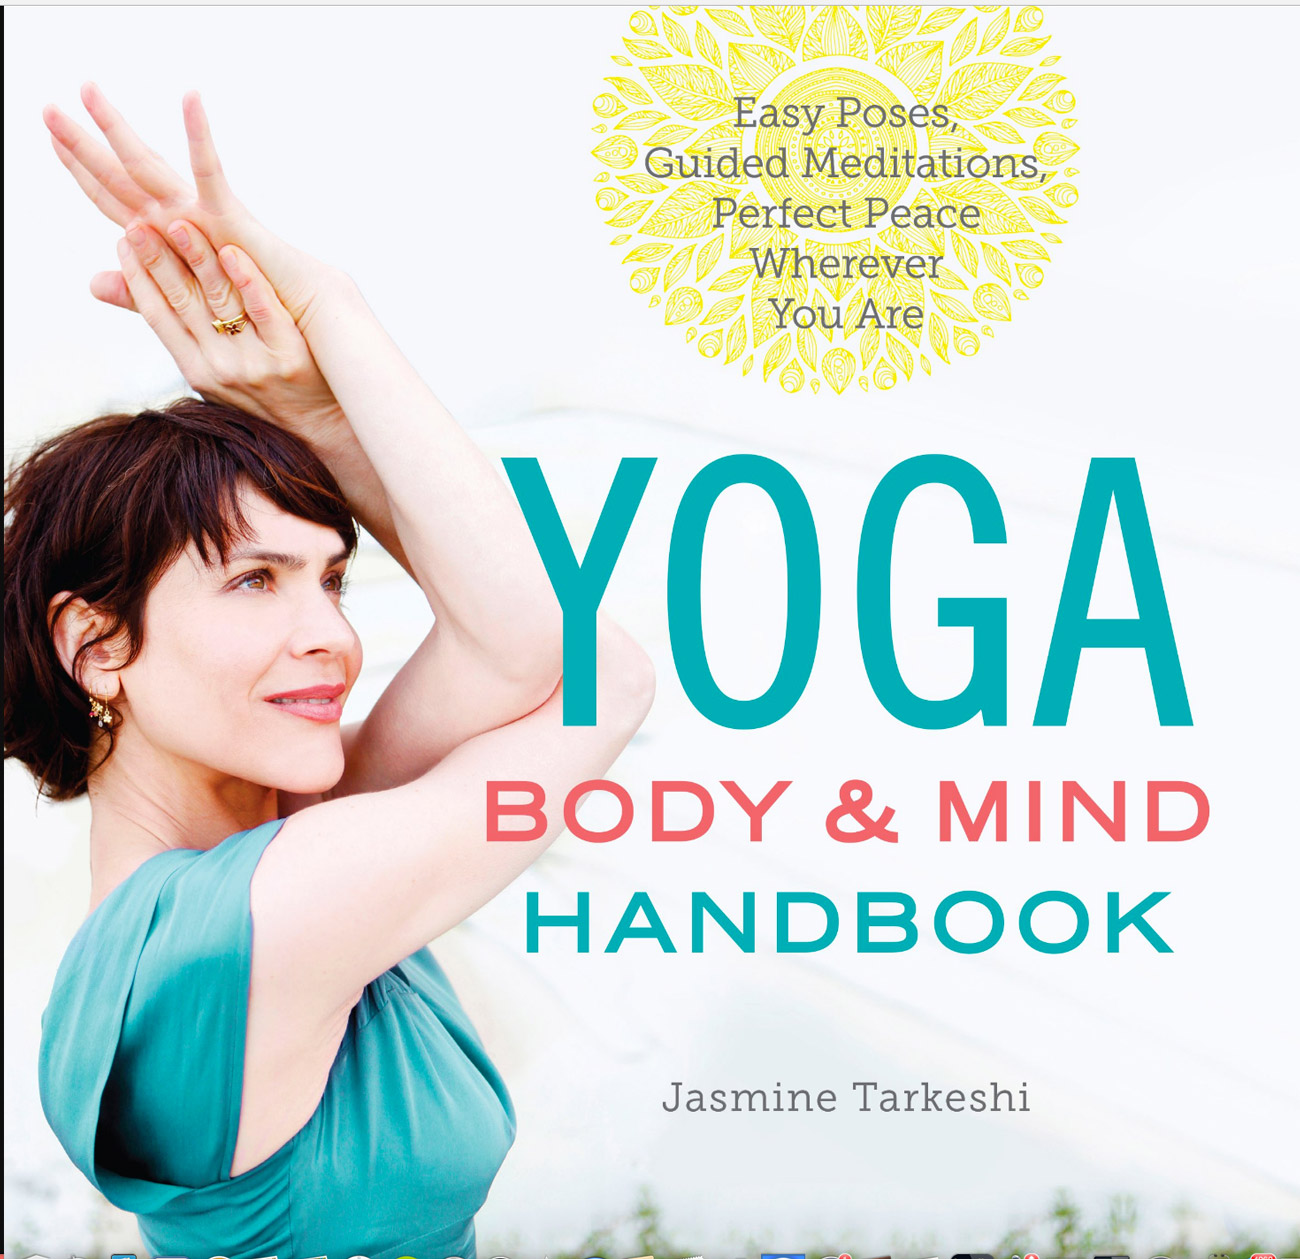 Becca Henry photography - photography for book cover - Yoga body and mind handbook- Yoga photography